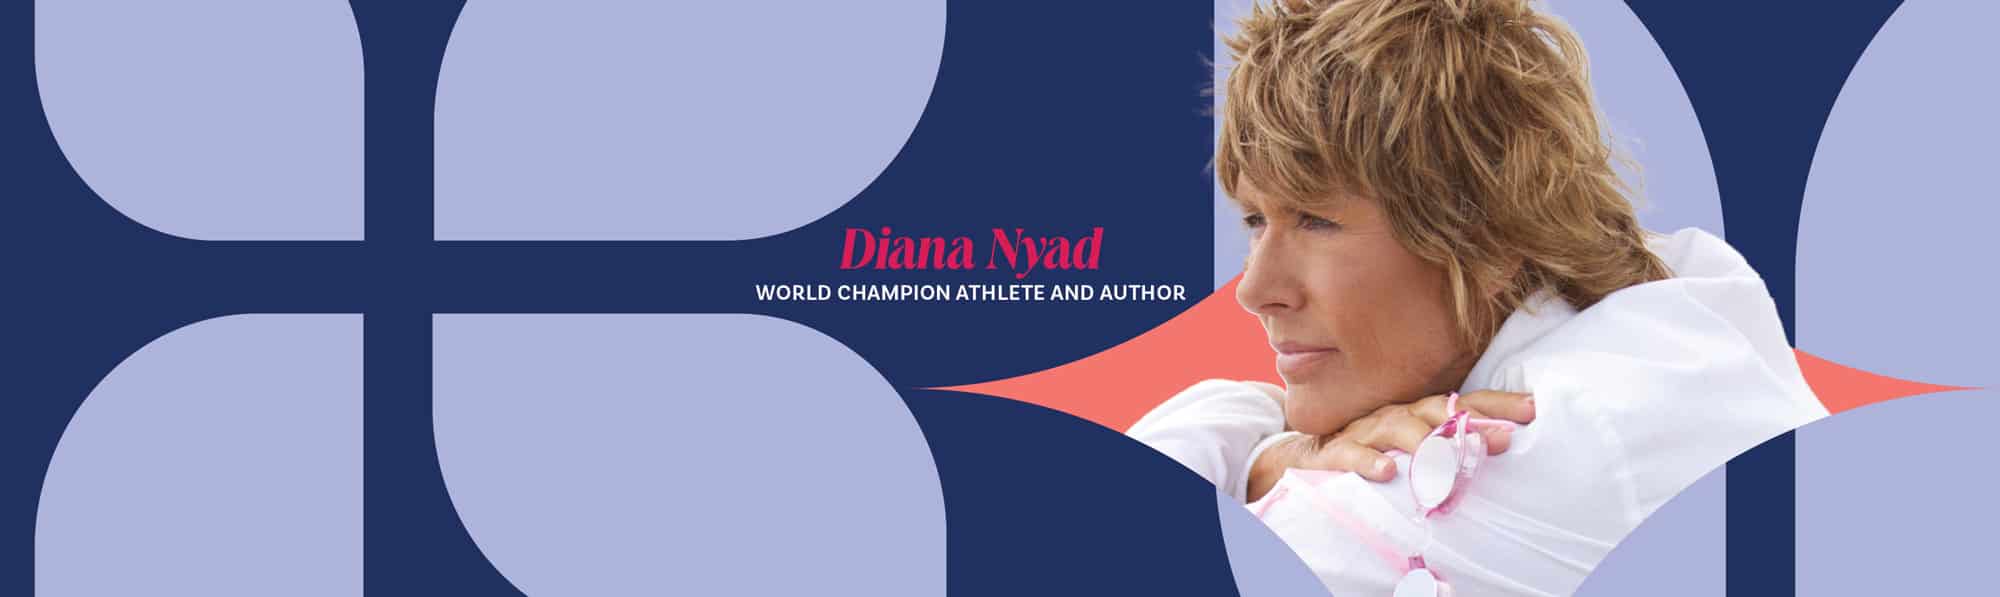 Join Diana Nyad at the Pennsylvania Conference for Women on November 7th in Philadelphia, PA!